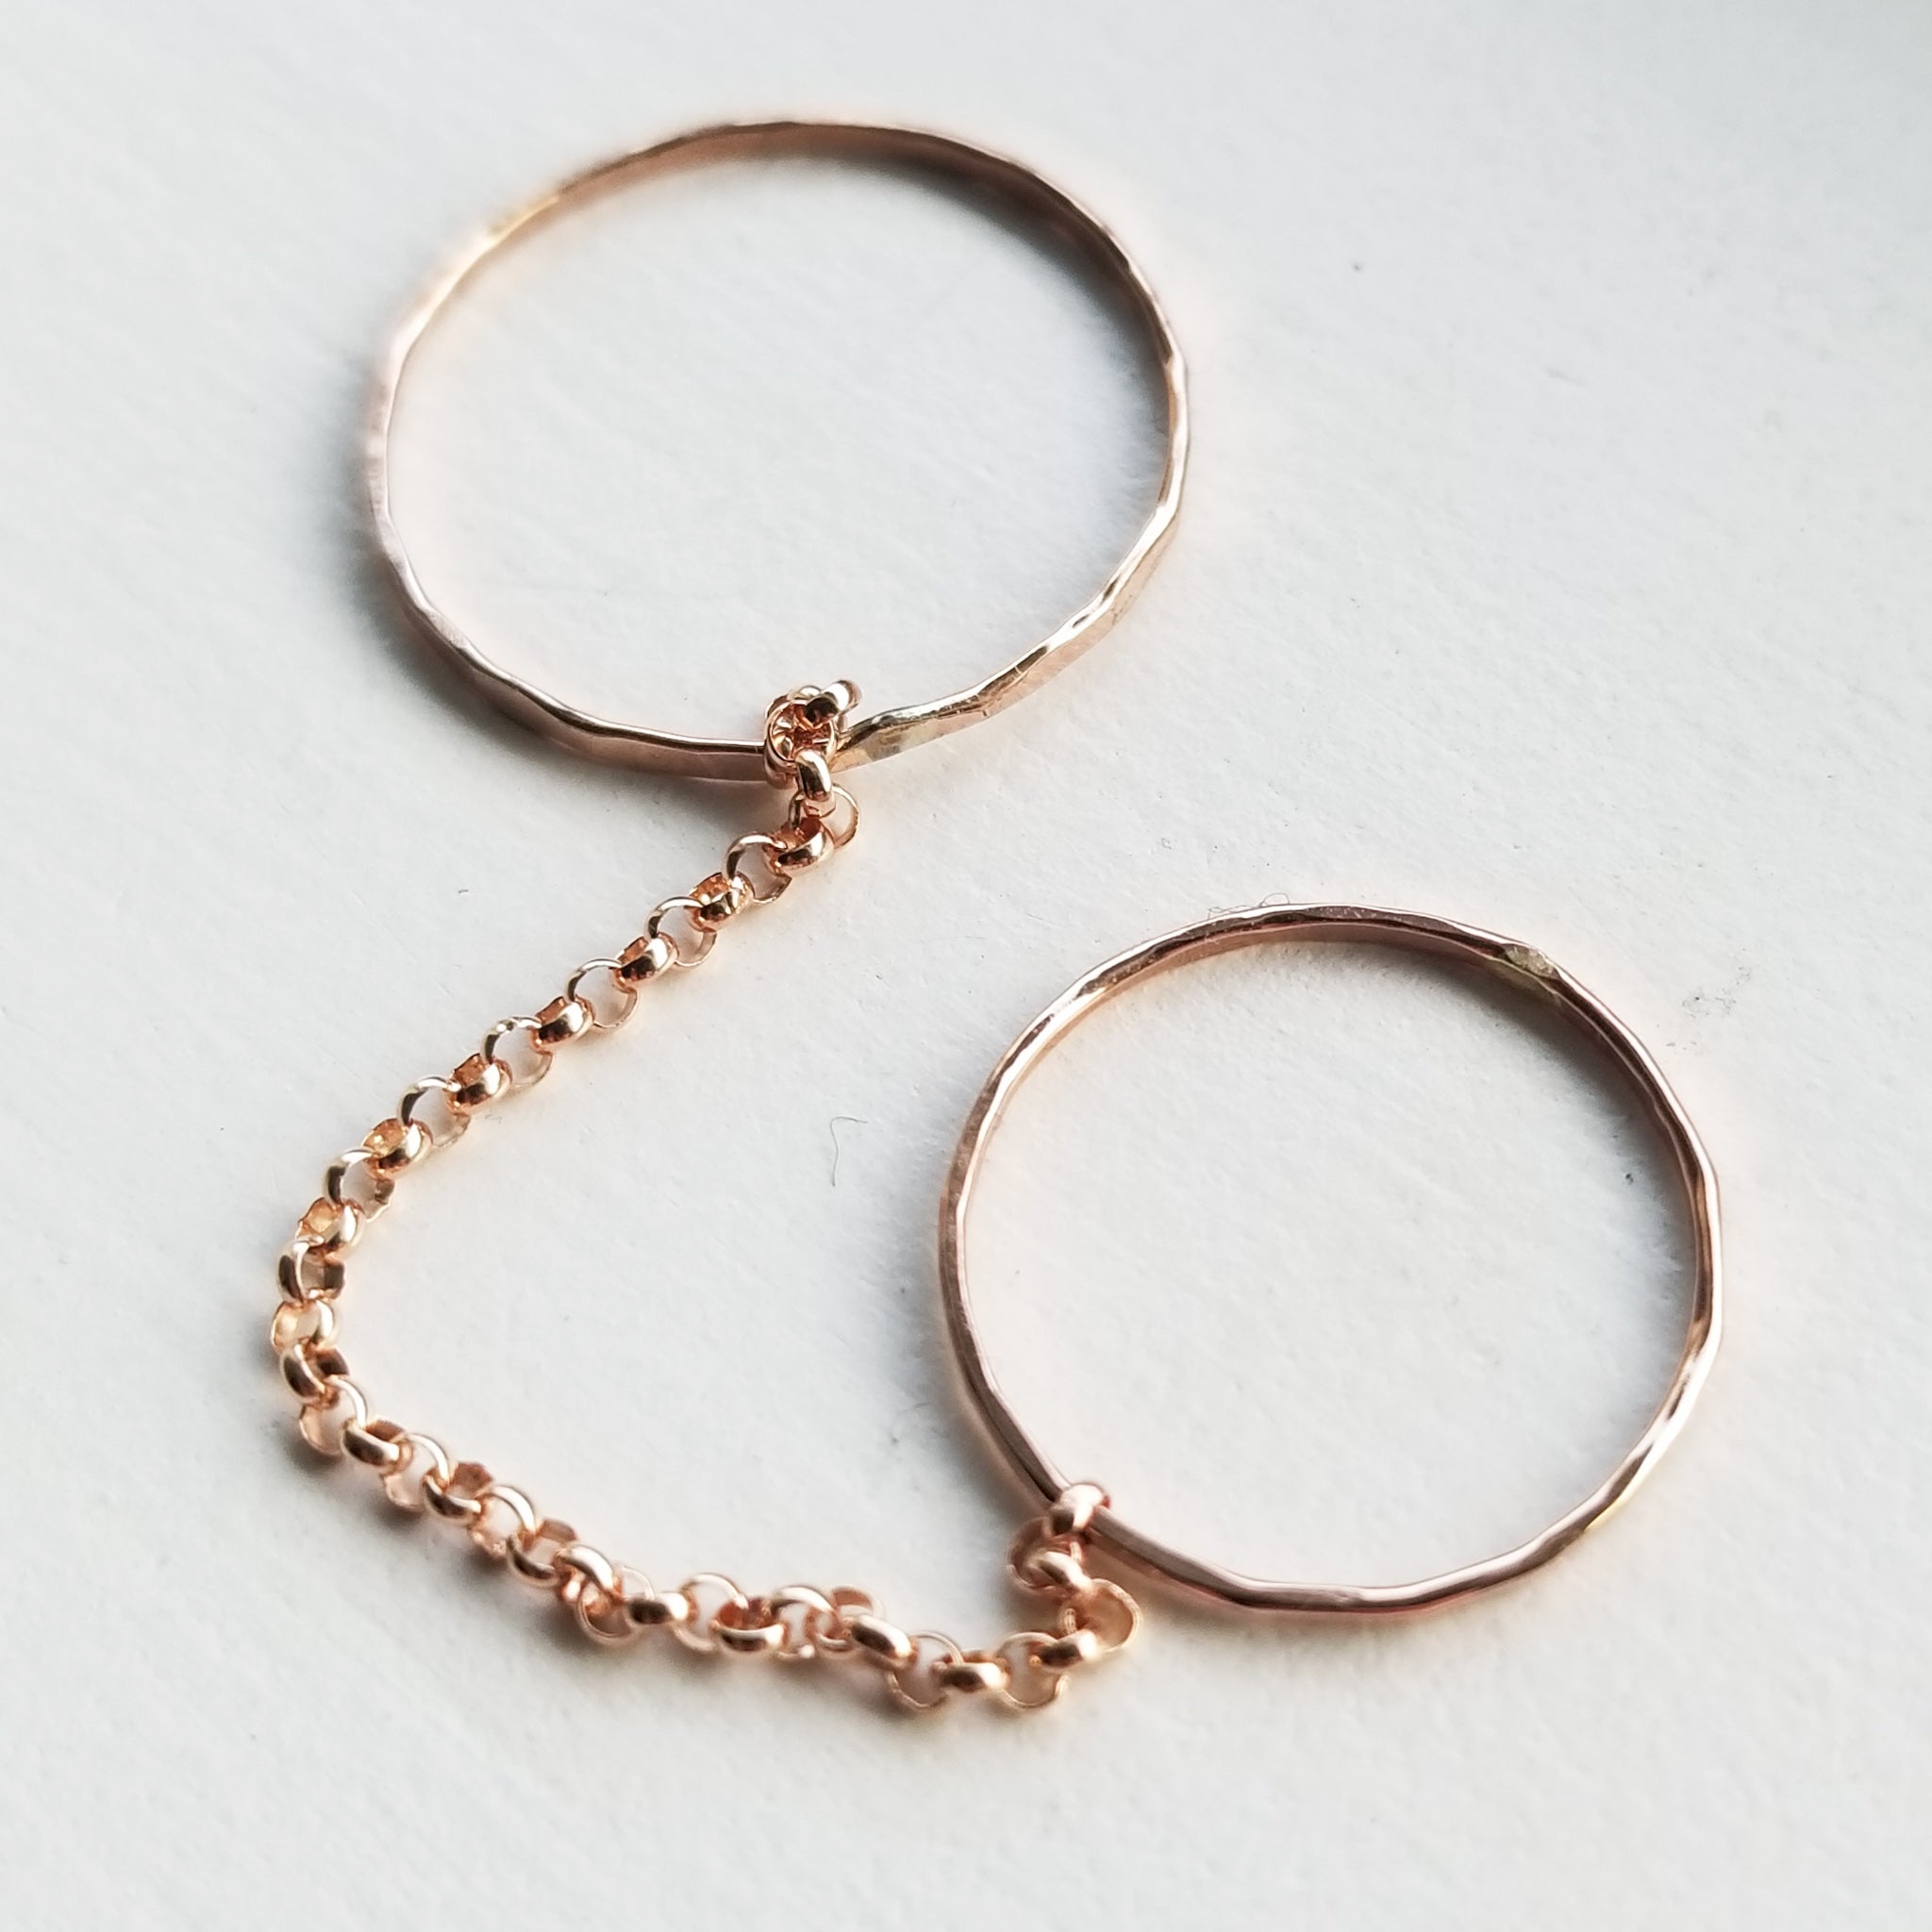 a set of two rose gold simple band rings connected by a rose gold chain on a white background